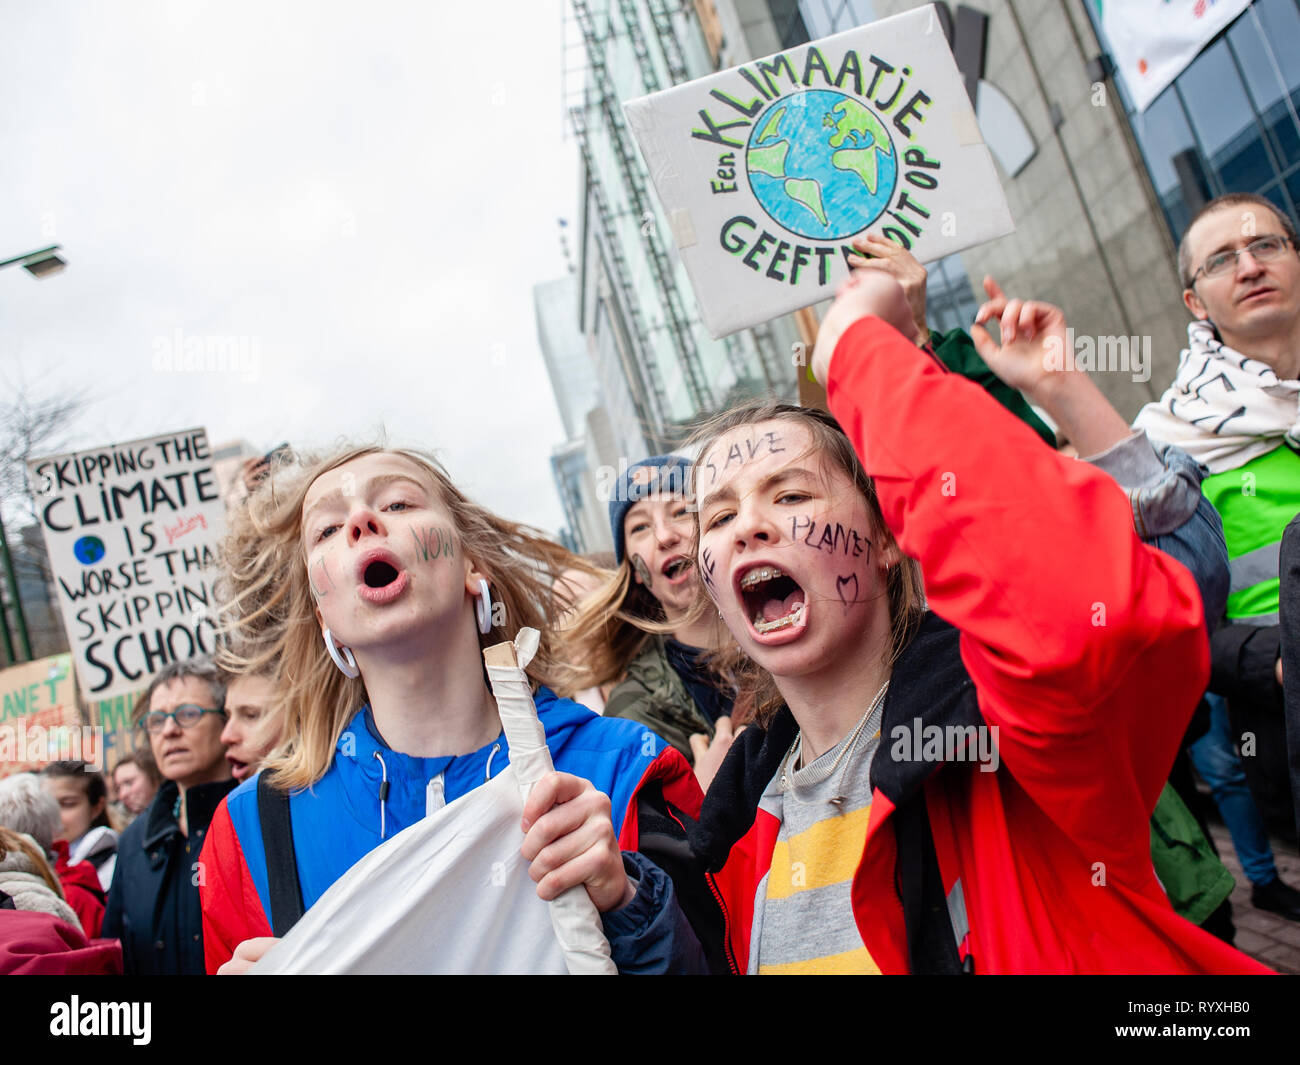 Brussels, North Brabant, Belgium. 15th Mar, 2019. People are seen screaming slogans behind the principal banner during the Global climate strike for future rally. This Friday, tens of thousands of kids in more of 60 countries went on strike to demand climate change action. The school strike movement was inspired by Swedish teenager Greta Thunberg, who has been striking from school every Friday since last August to stand outside the Swedish parliament building and demand that her home country adheres to the Paris agreement on climate change. In Brussels, not just students, but teachers, scien Stock Photo